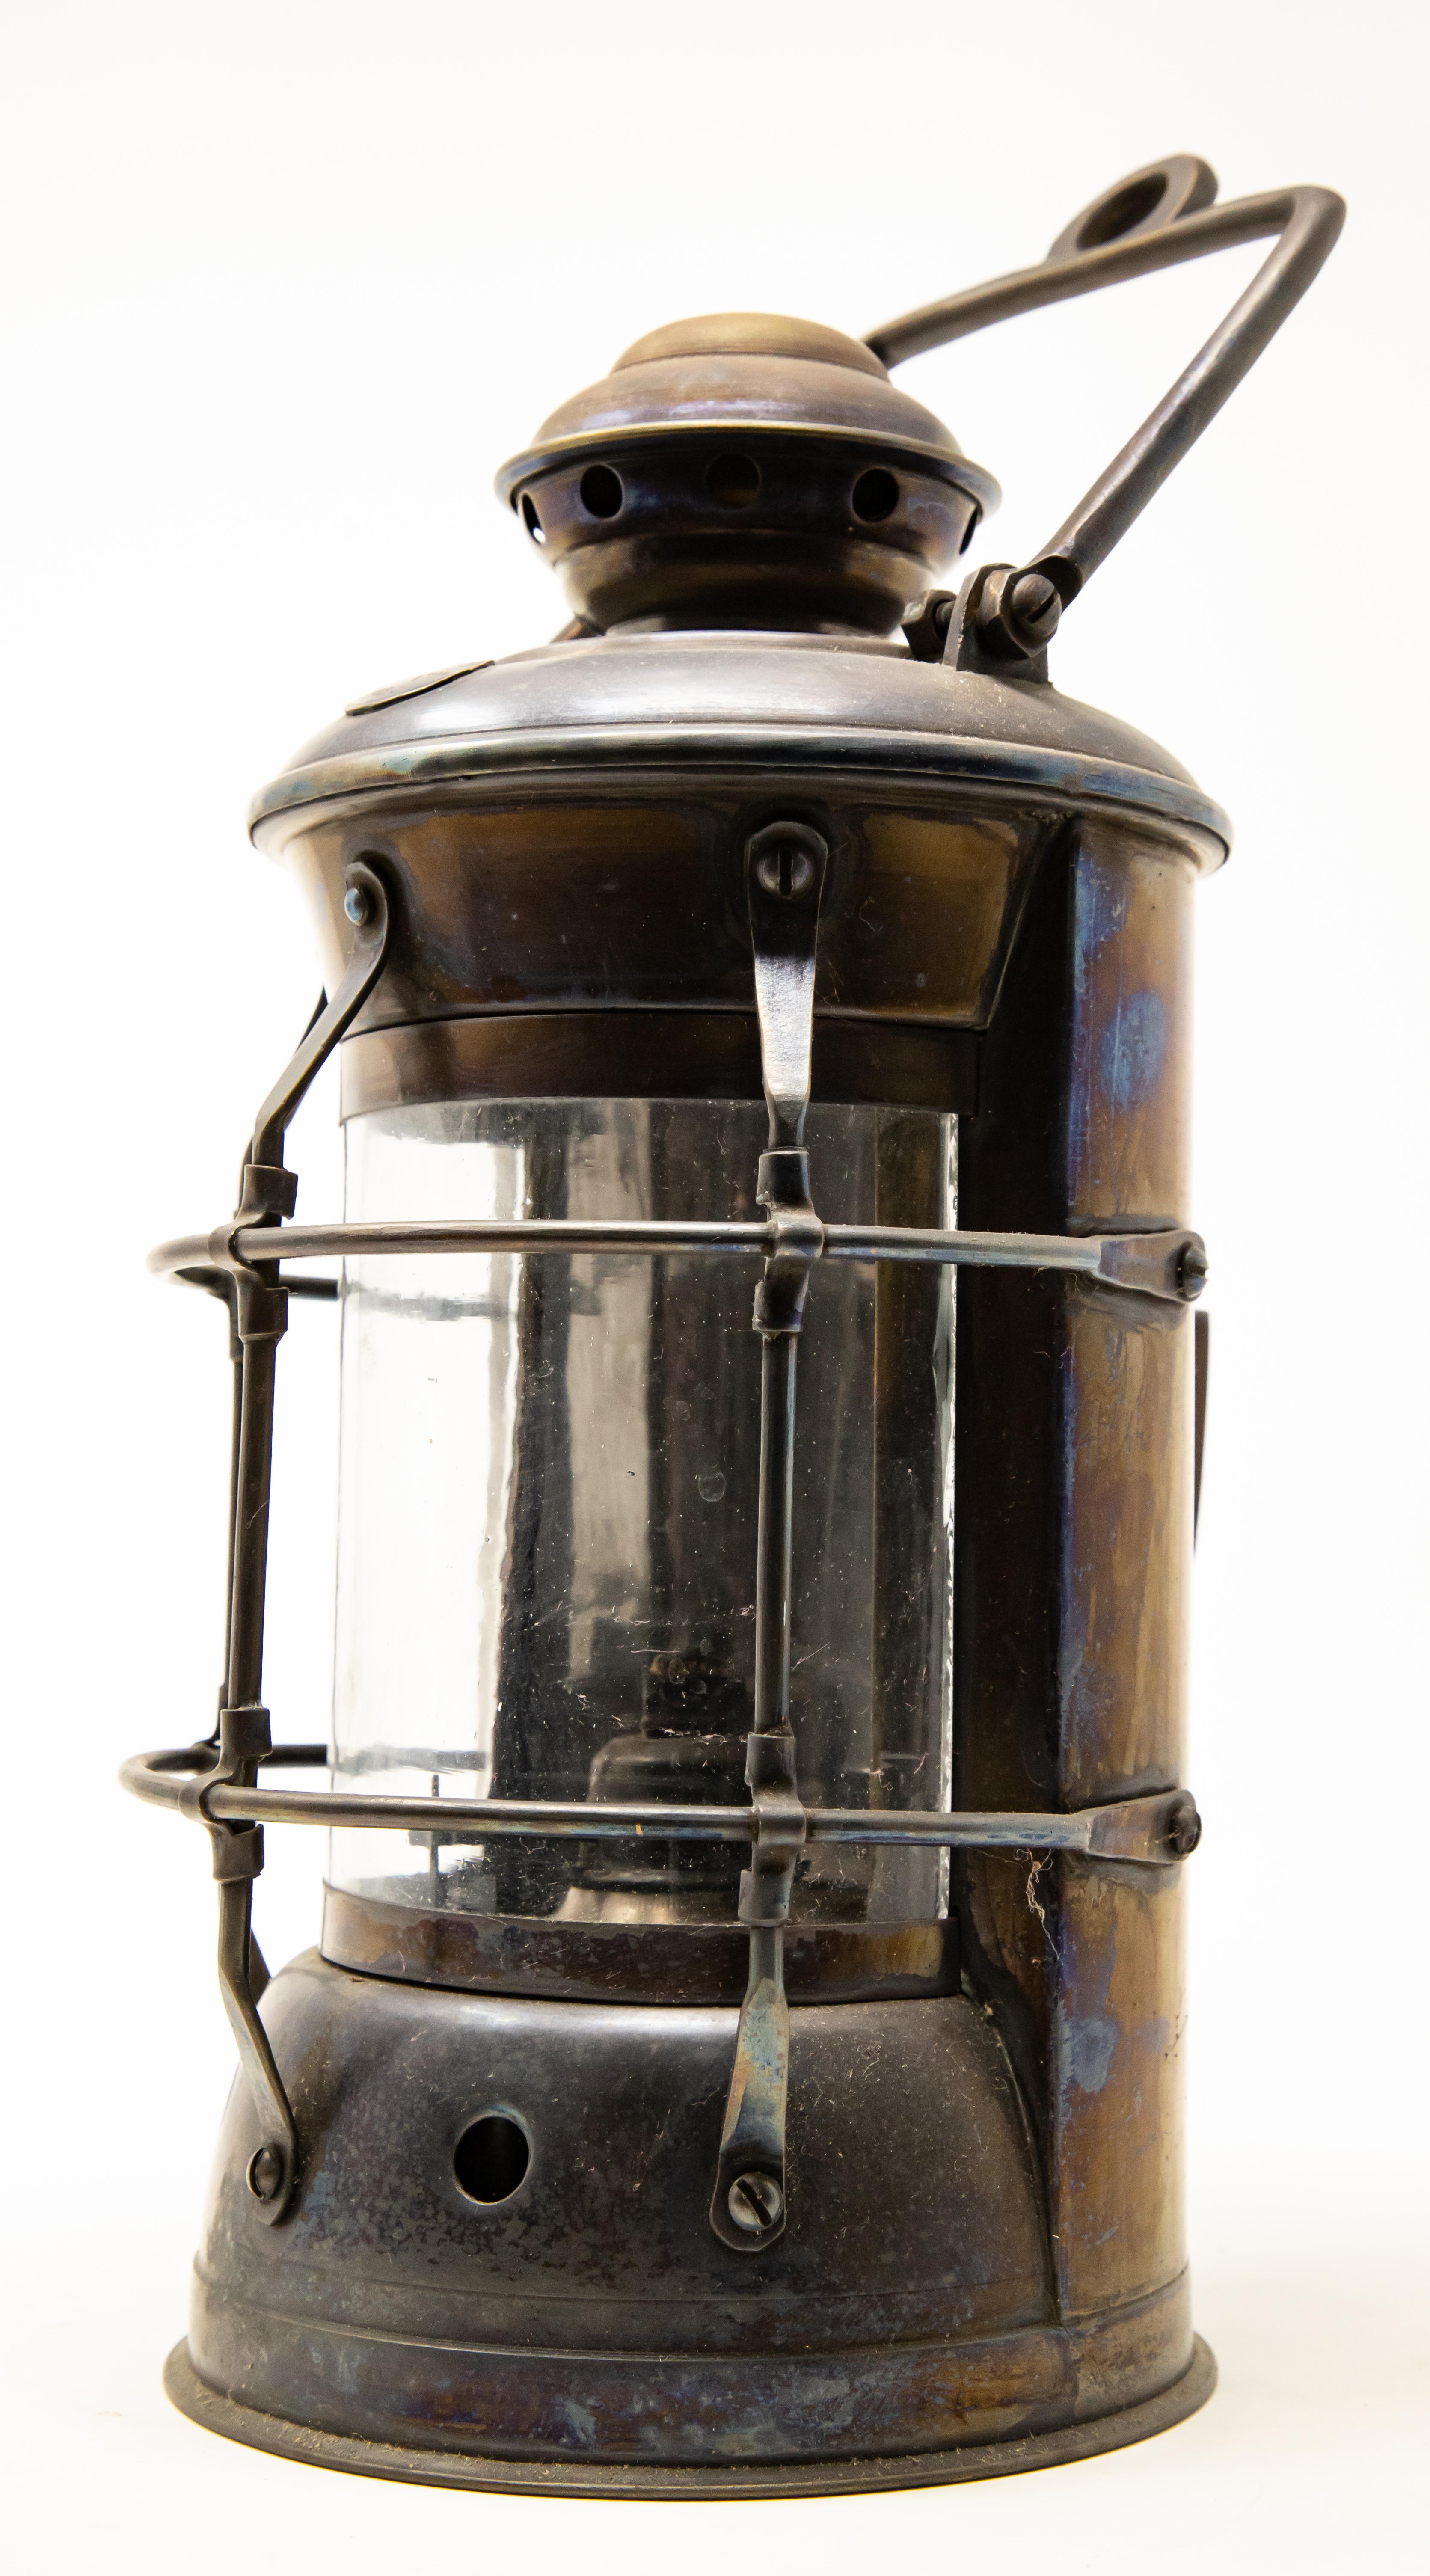 Offering this stunning copper ship lantern by Tung Woo out of Hong Kong. Gorgeous patina to the copper over the years.